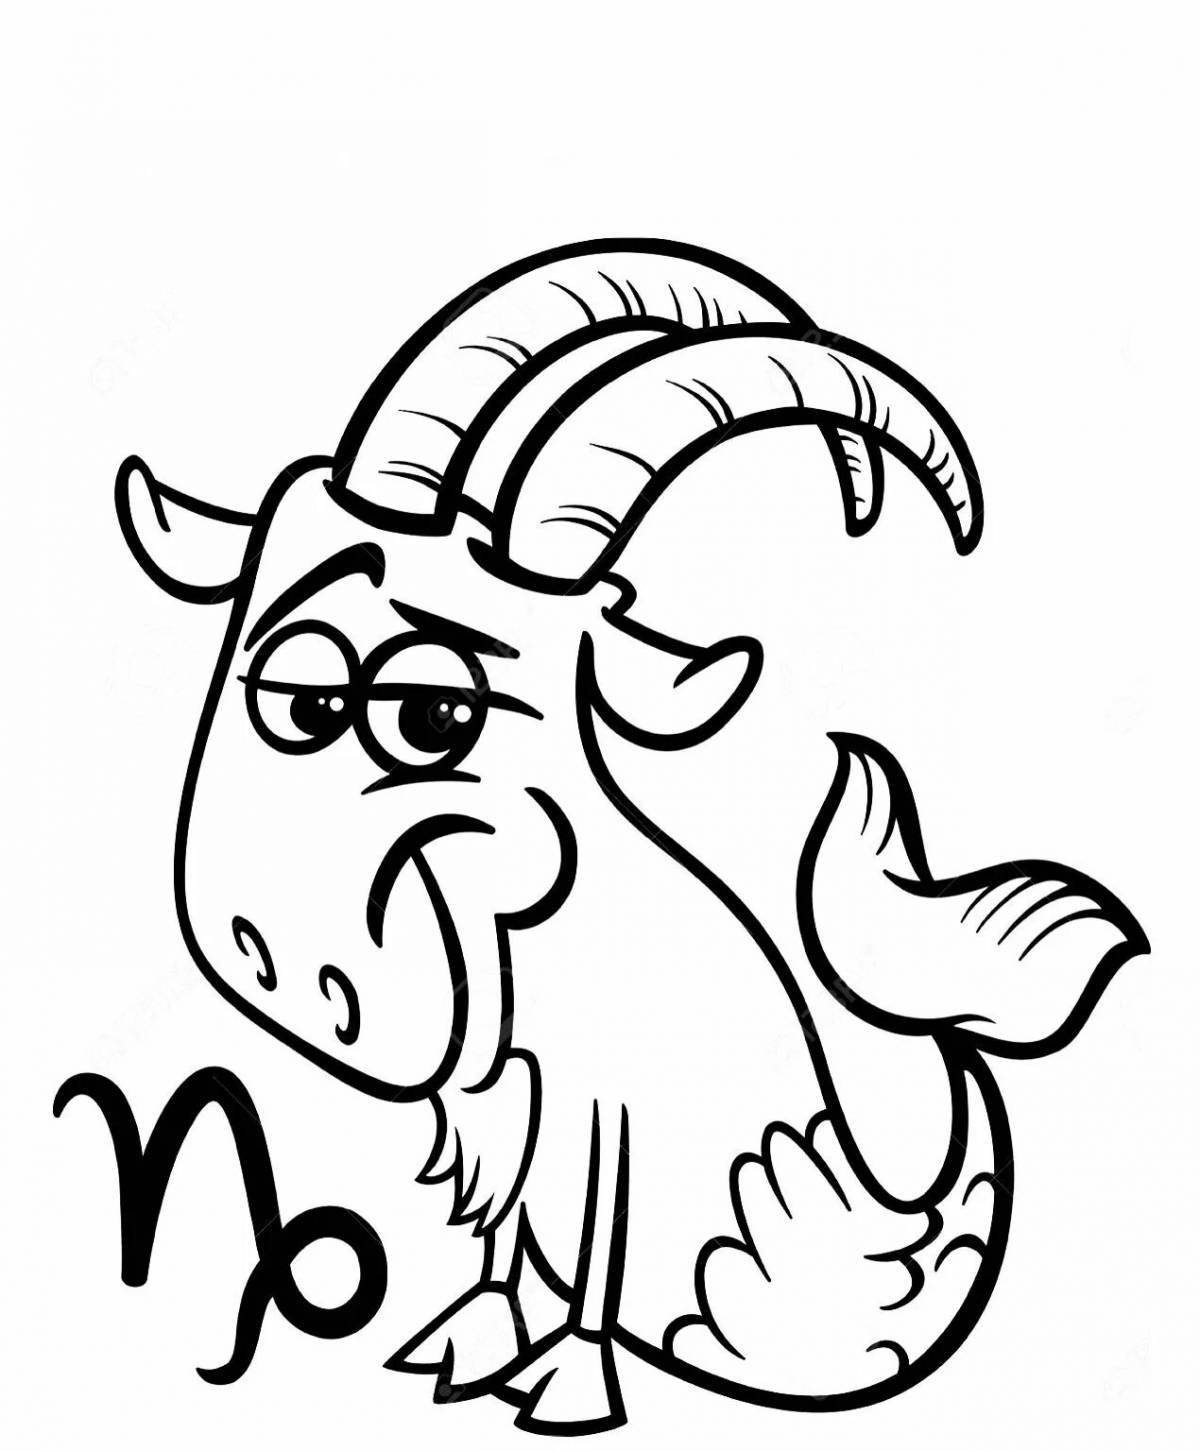 Majestic ibex coloring page